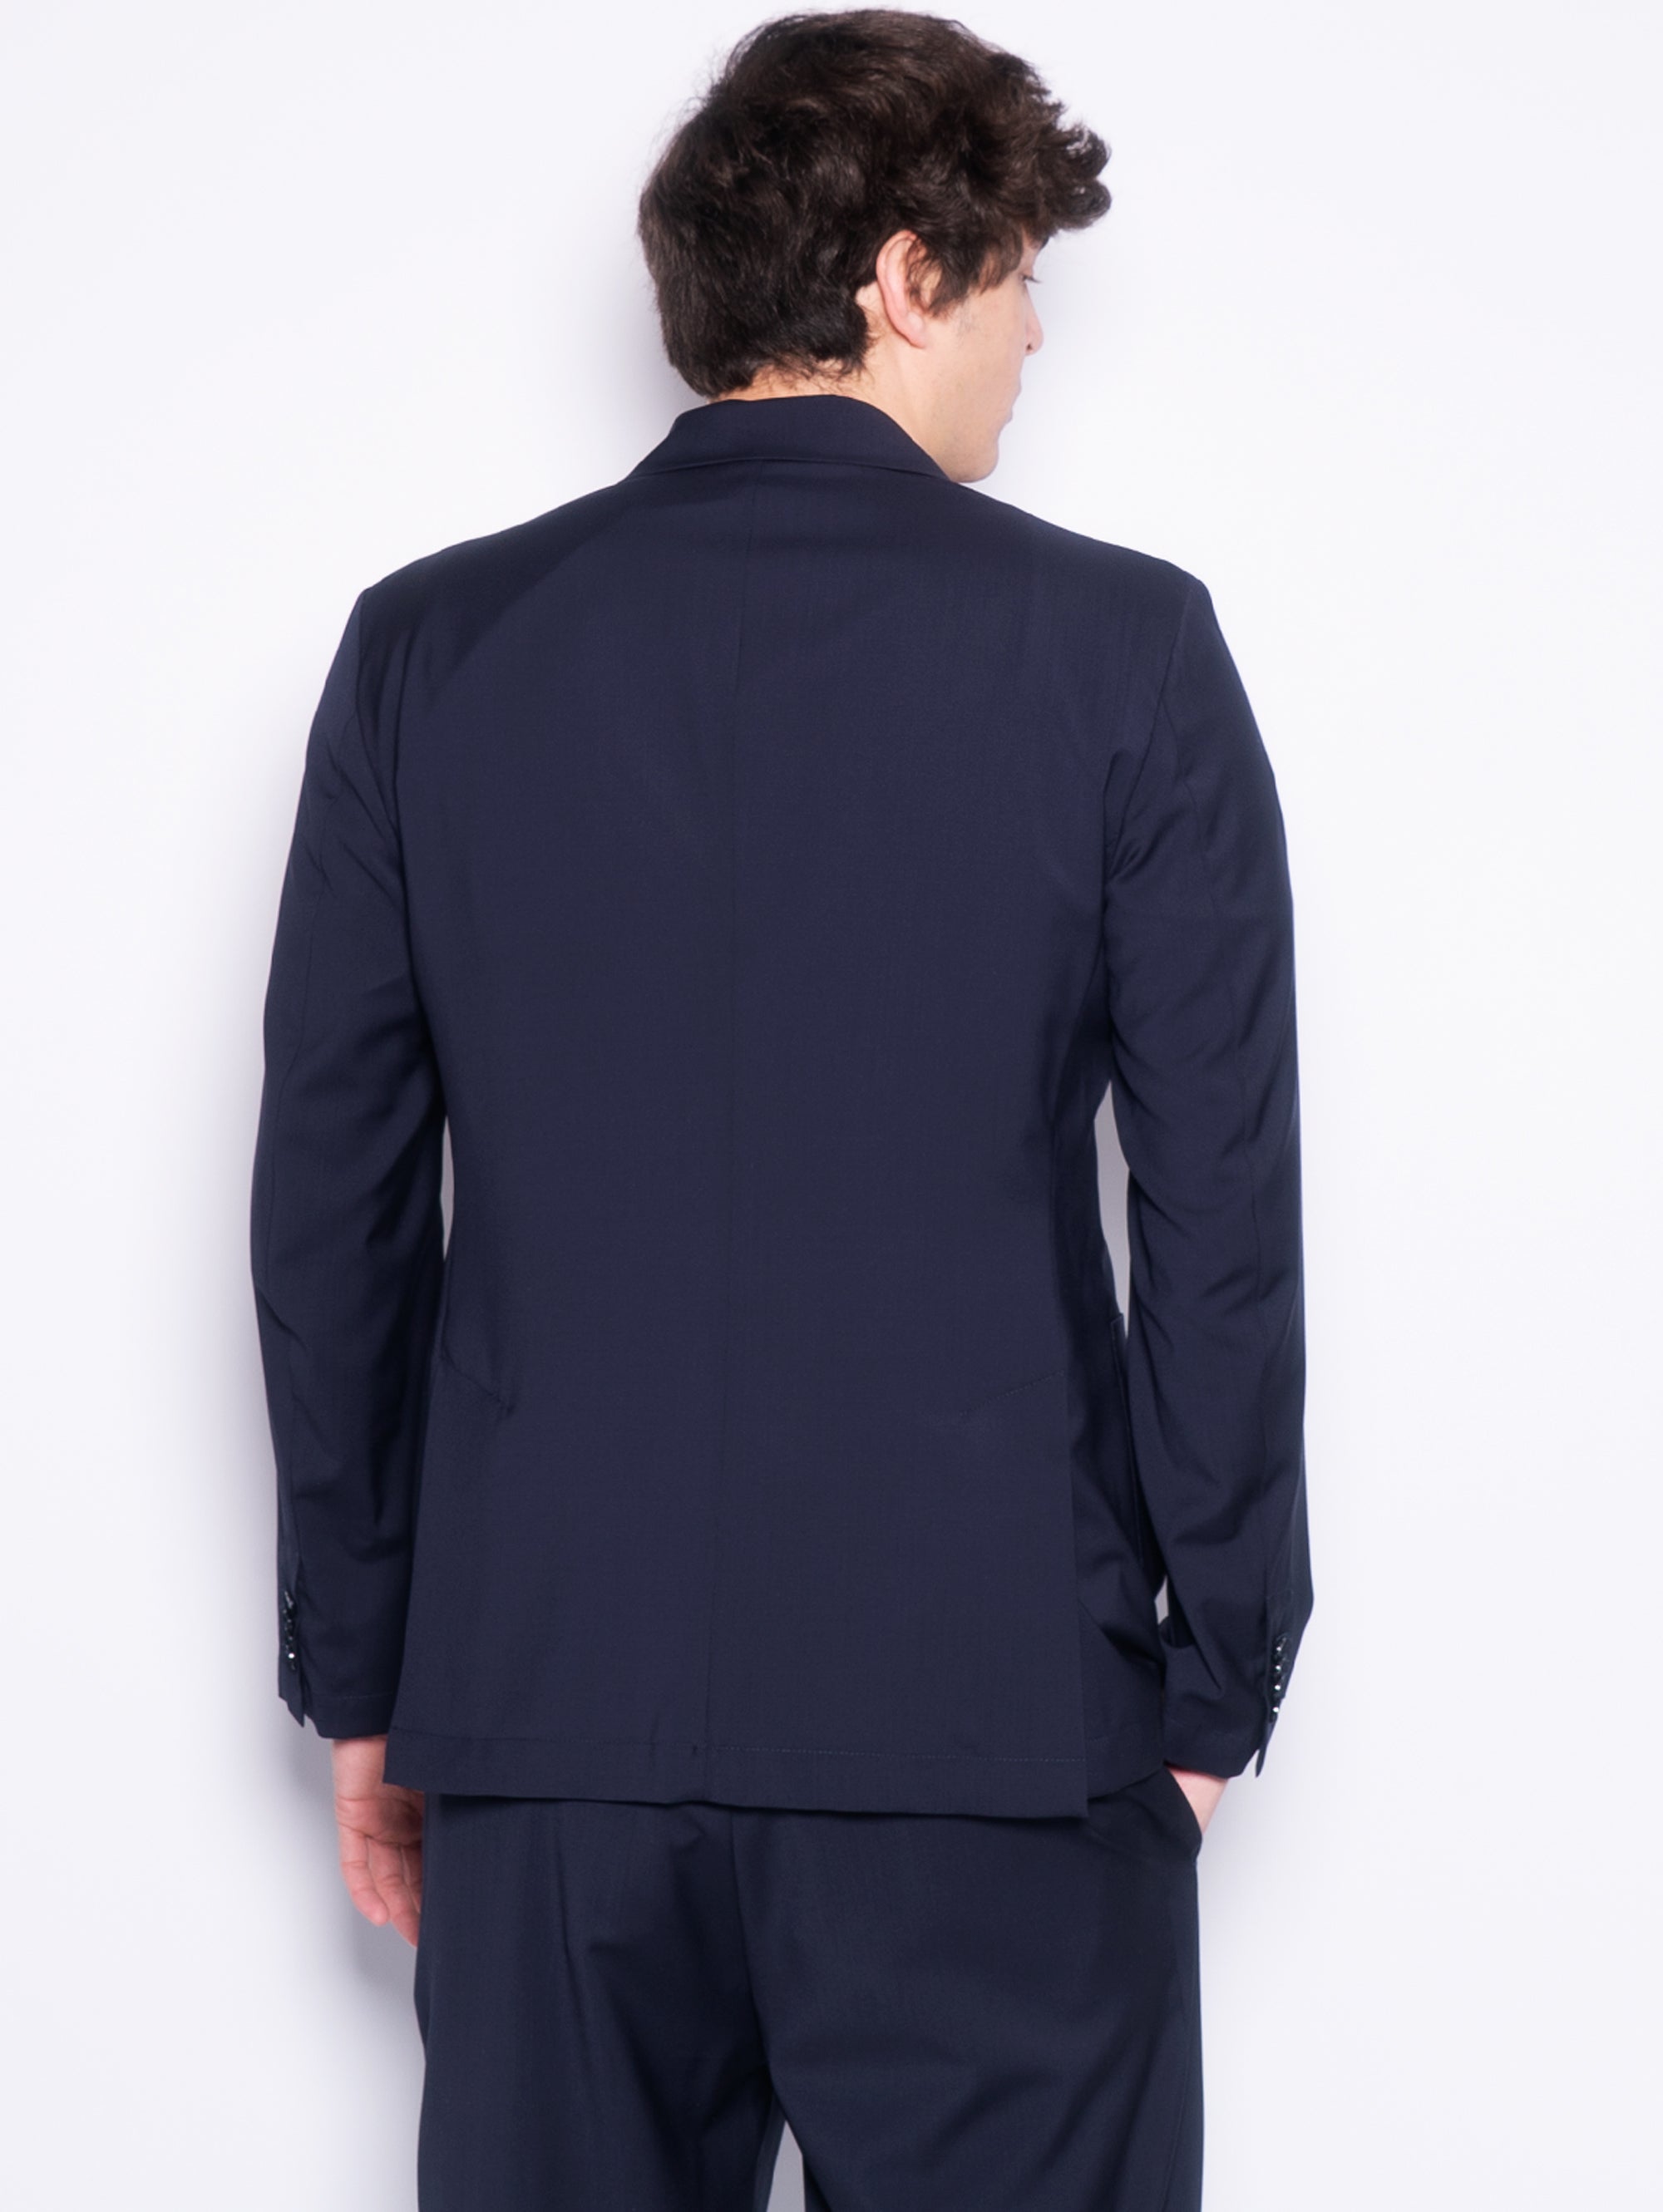 Siroco Navy Blue Unlined Double Breasted Jacket